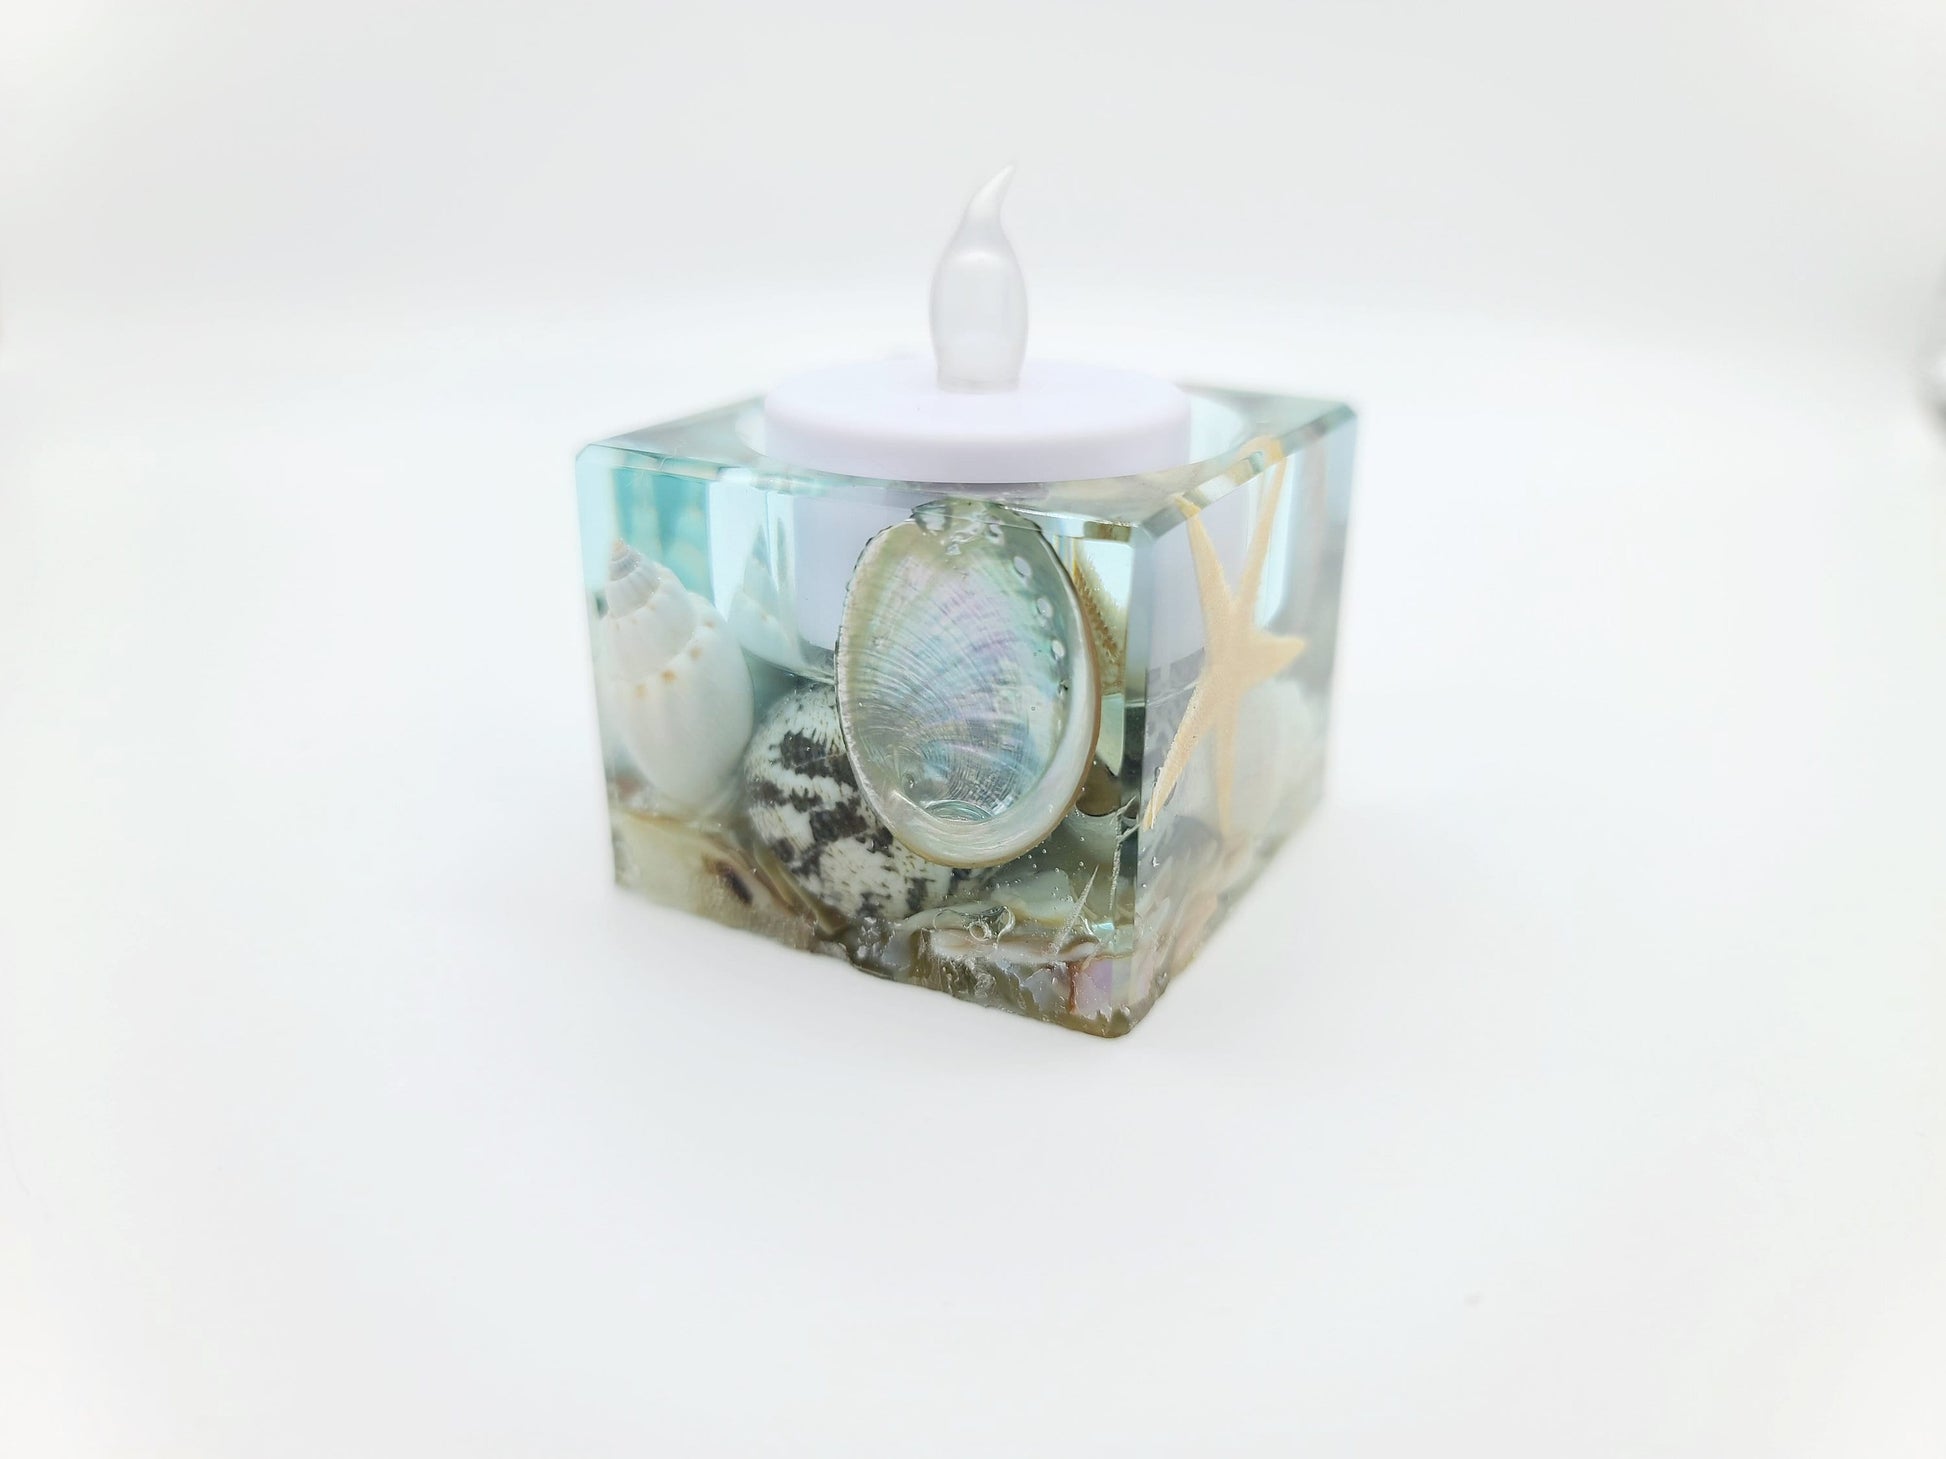 Ocean Themed Square Candle Holder Made with Eco-Friendly Epoxy Resin & Seashells - Includes Choice of Real SCENTED Tealight or LED Tealight